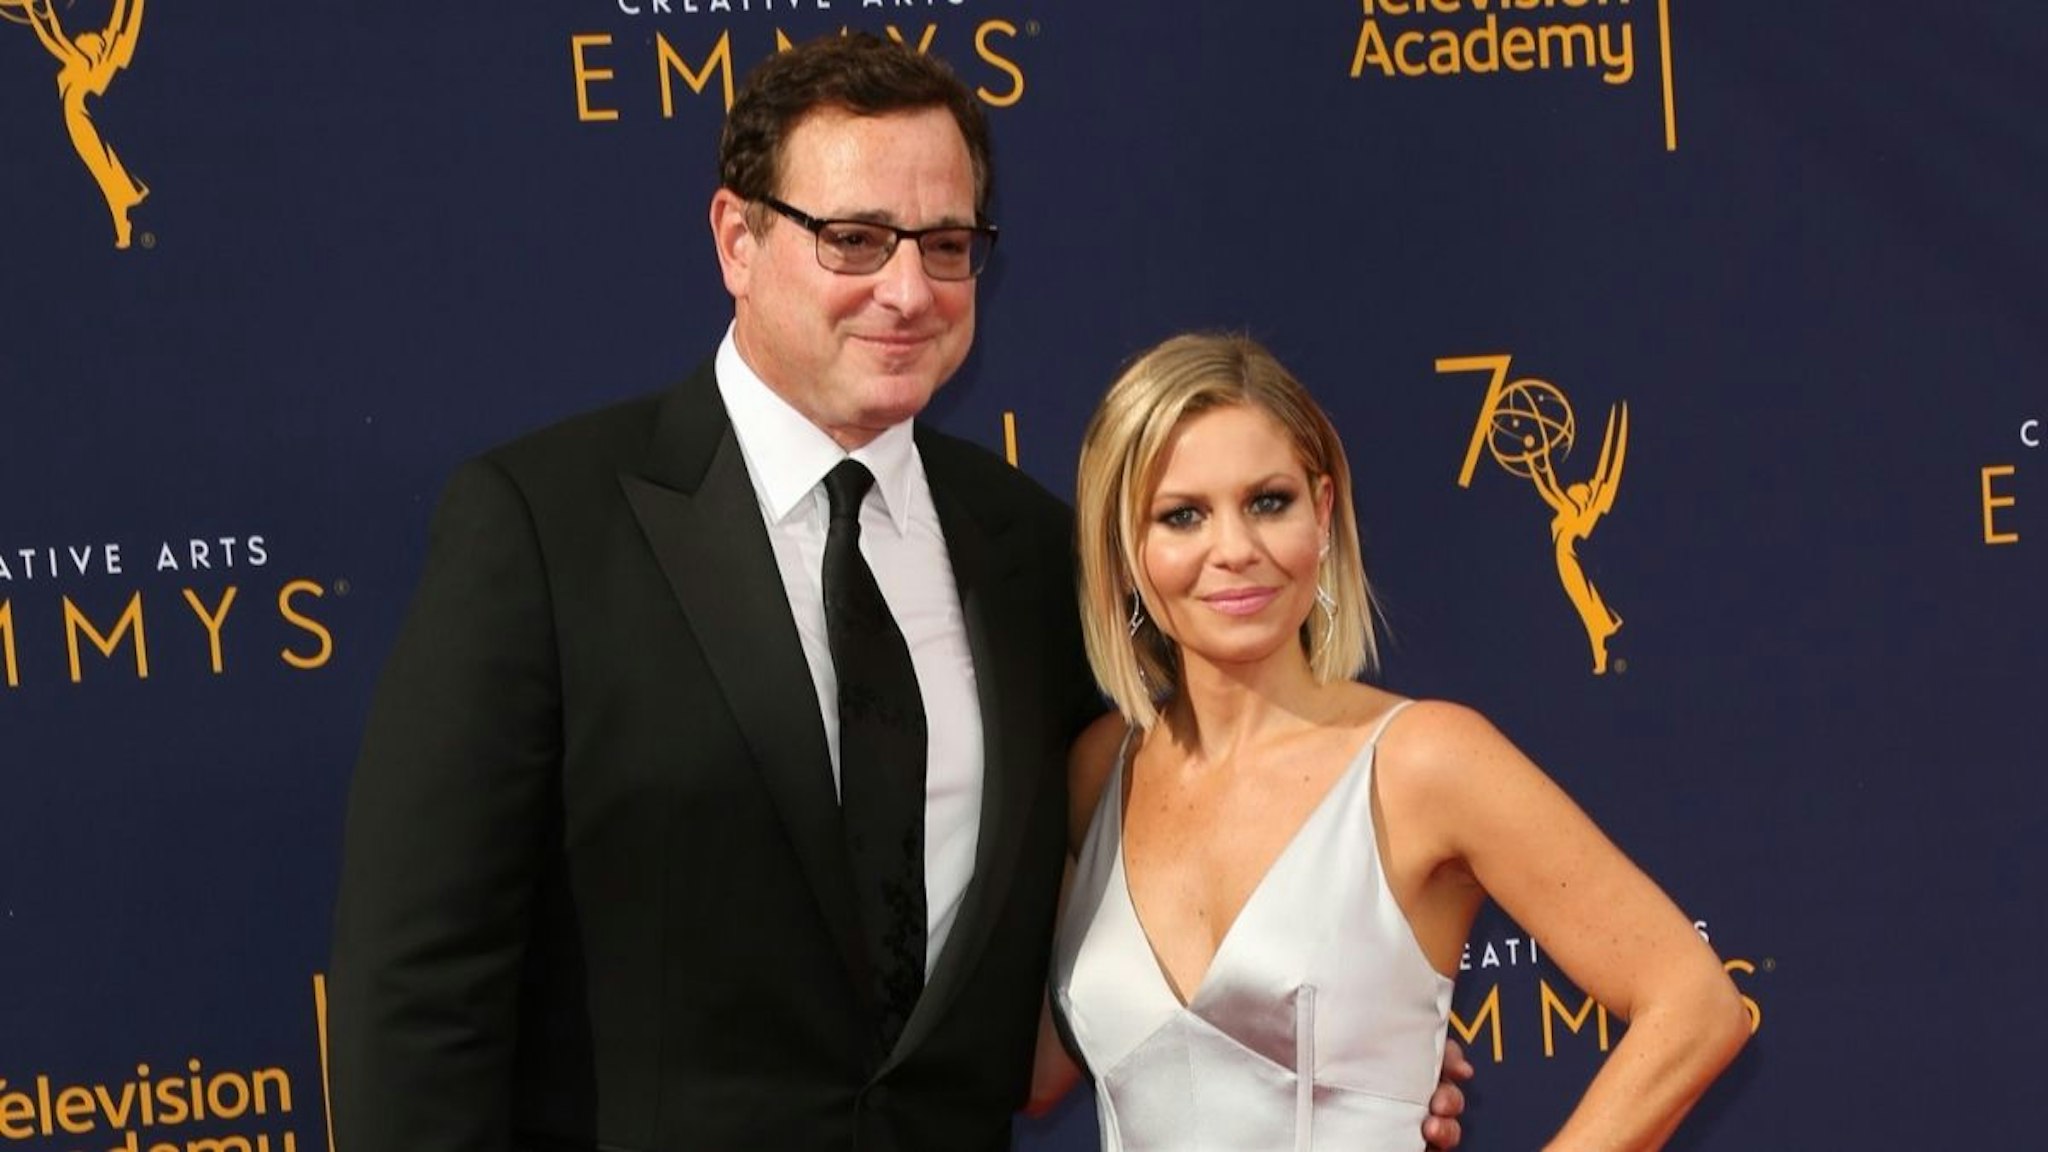 Actors Bob Saget (L) and Candace Cameron Bure (R) attend the 2018 Creative Arts Emmy Awards at Microsoft Theater on September 8, 2018 in Los Angeles, California.